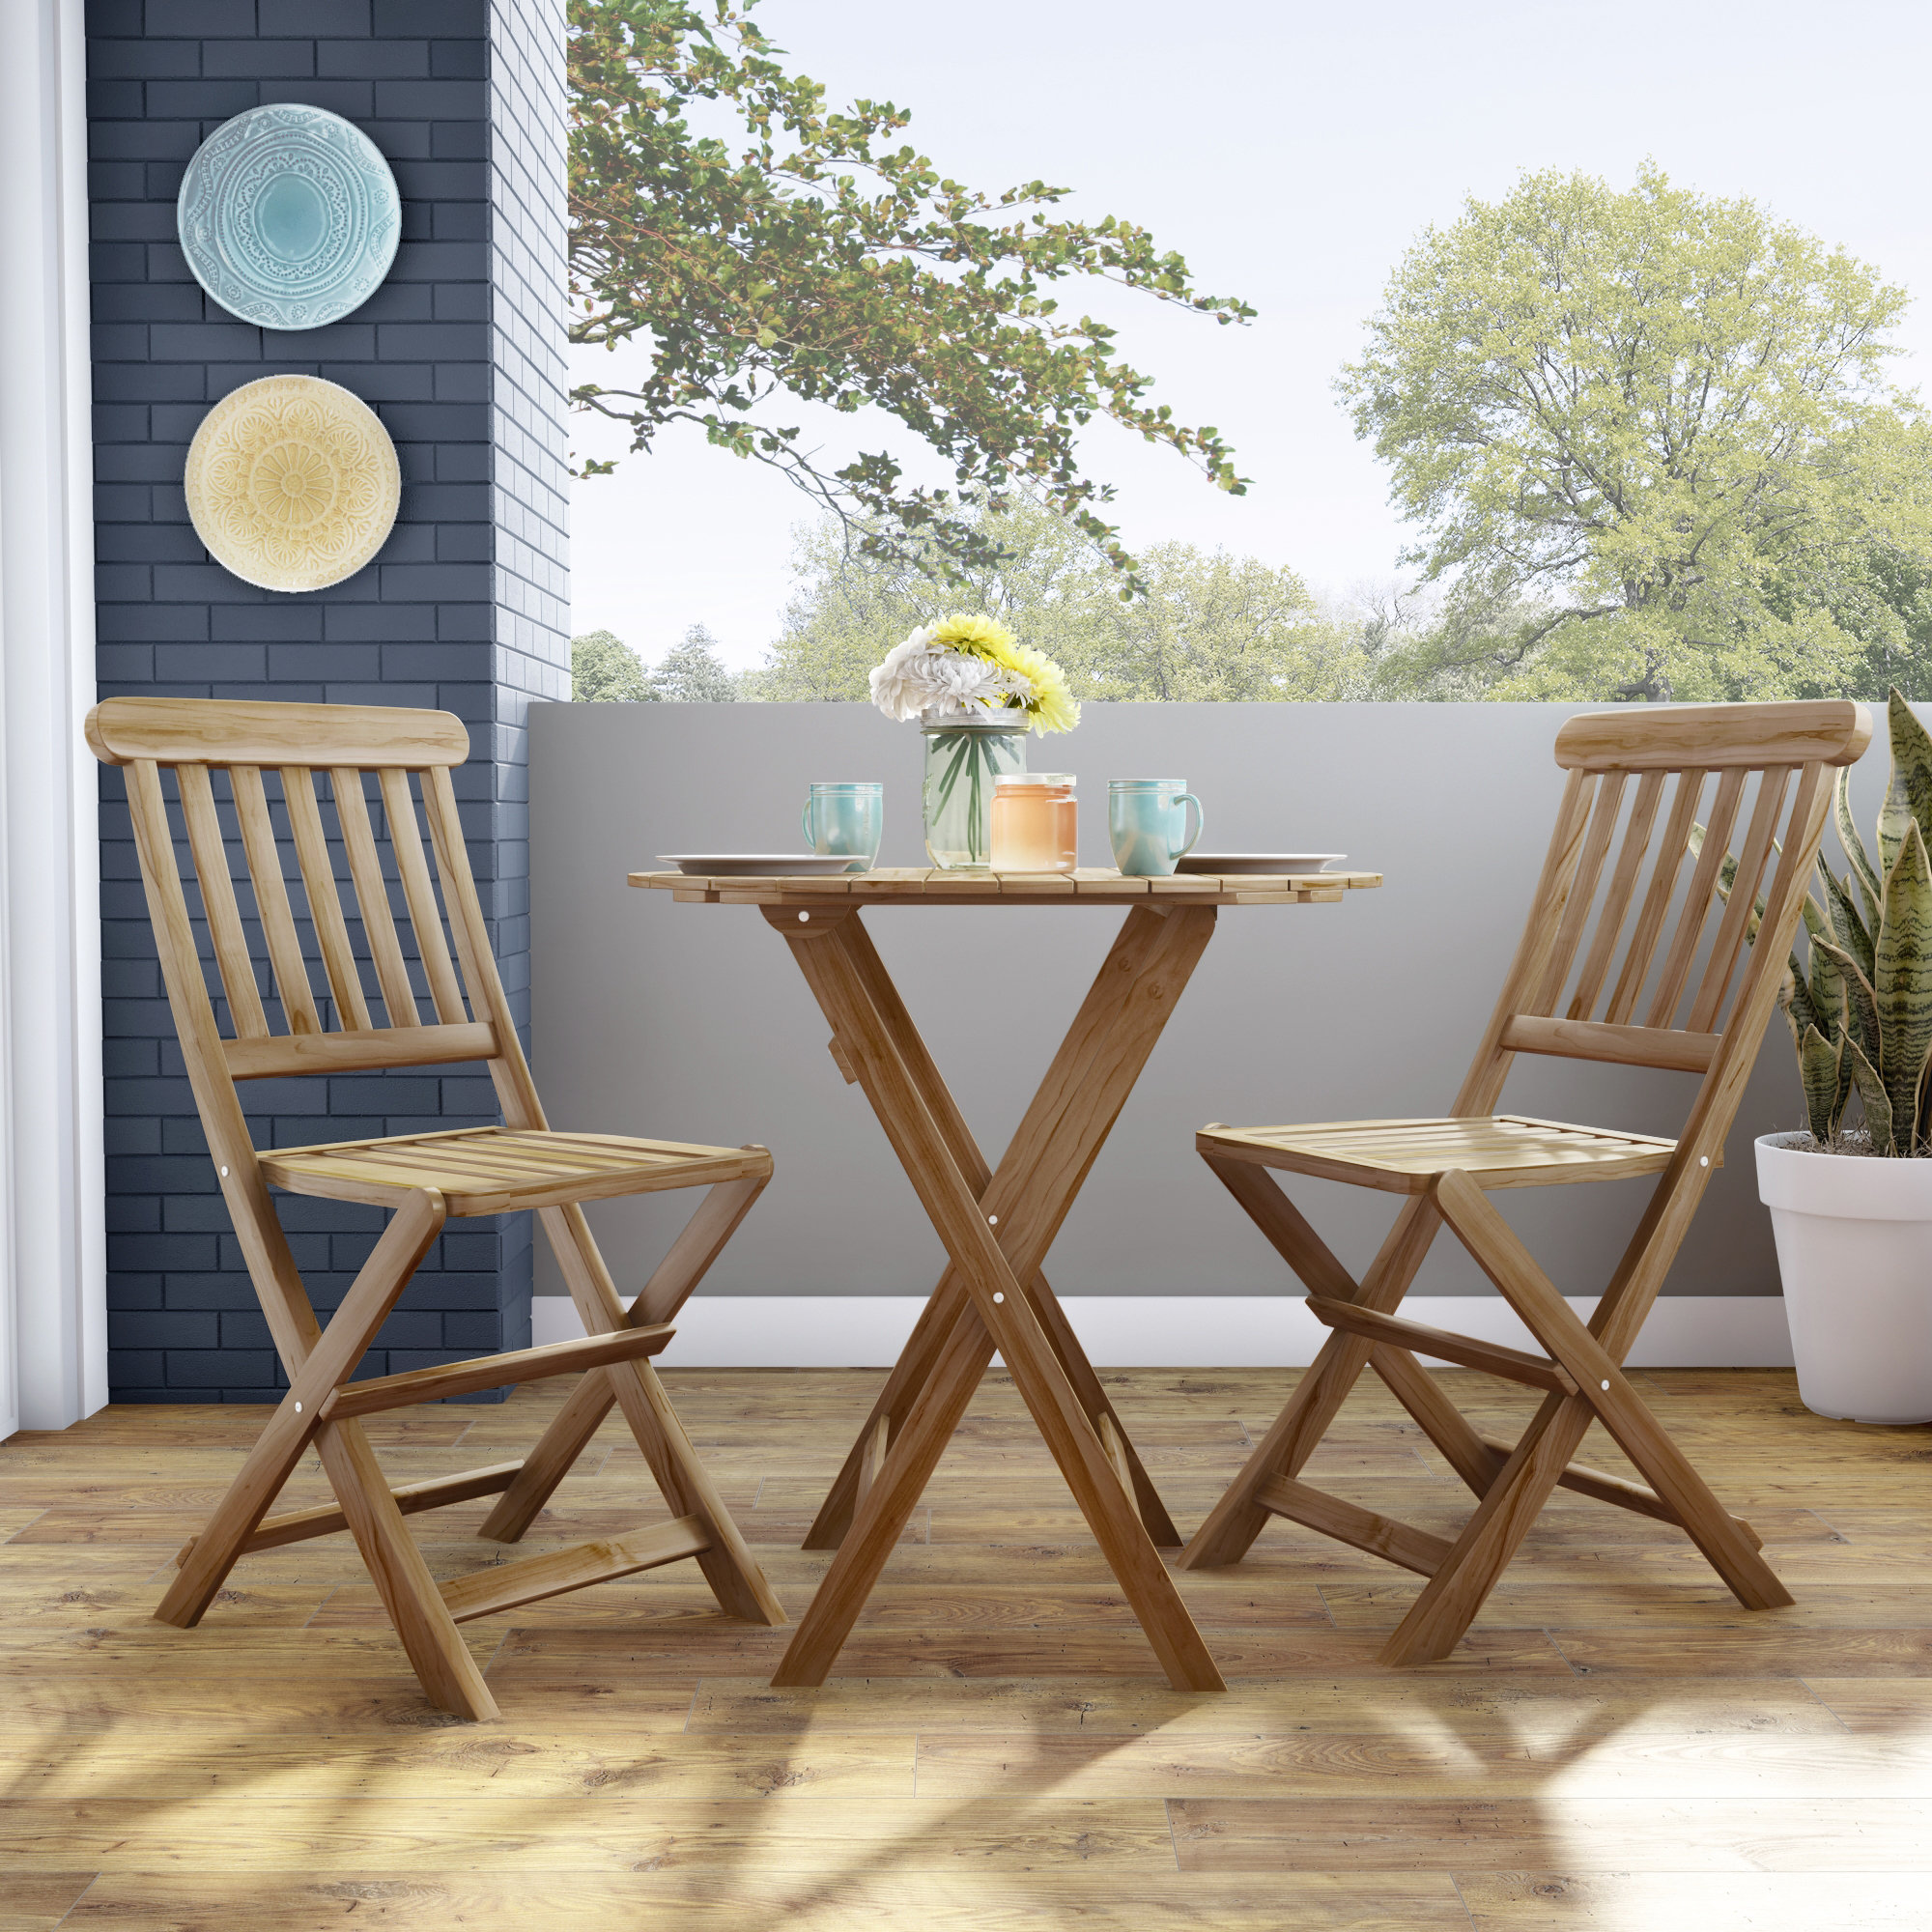 Oval table and 6 acacia chairs - Garden furniture - Tikamoon